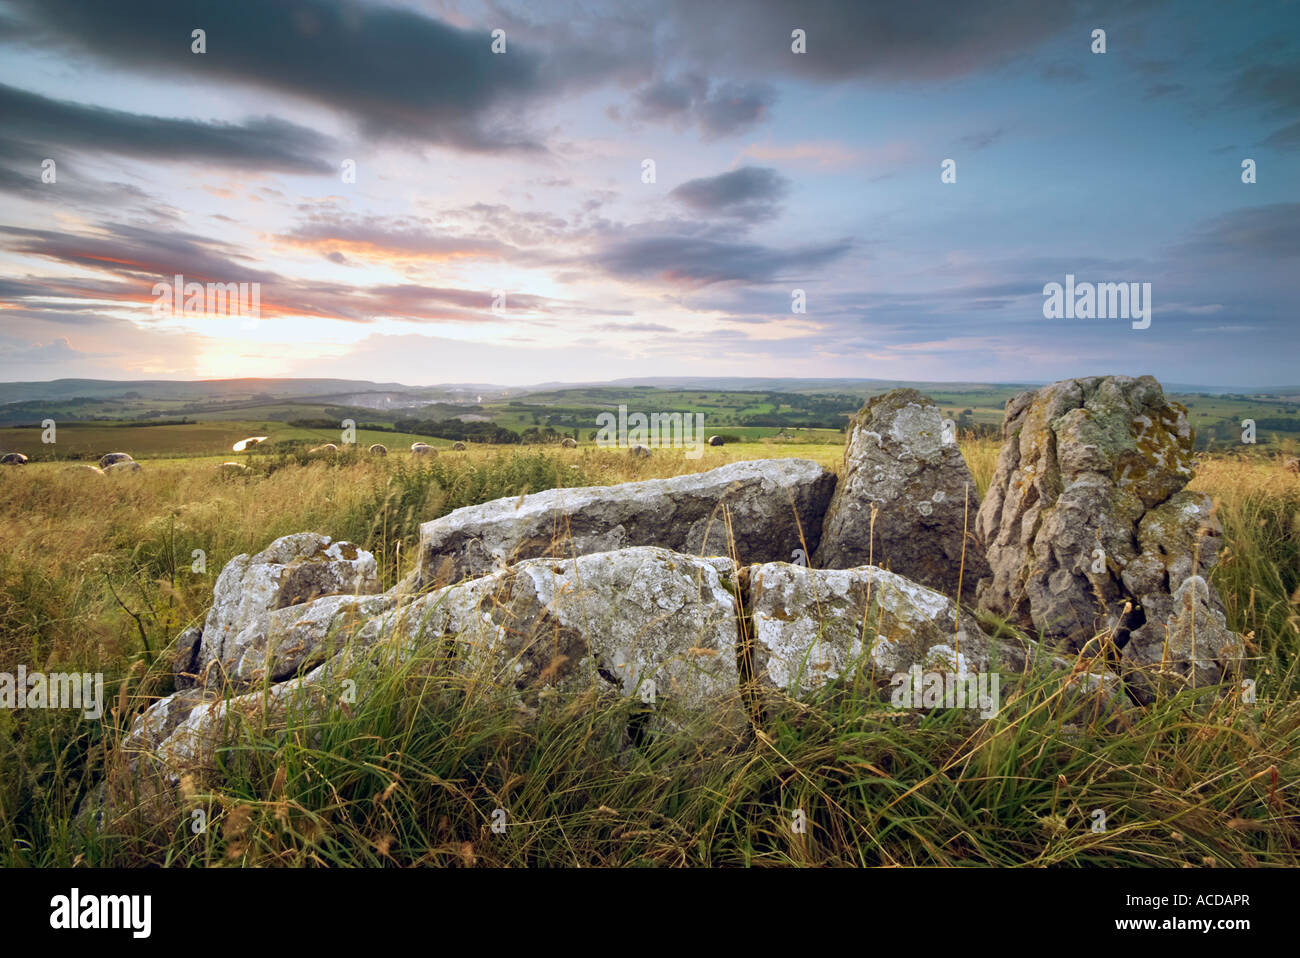 'Five Wells' chambered burial site on Taddington Moor in Derbyshire 'Great Britain Stock Photo